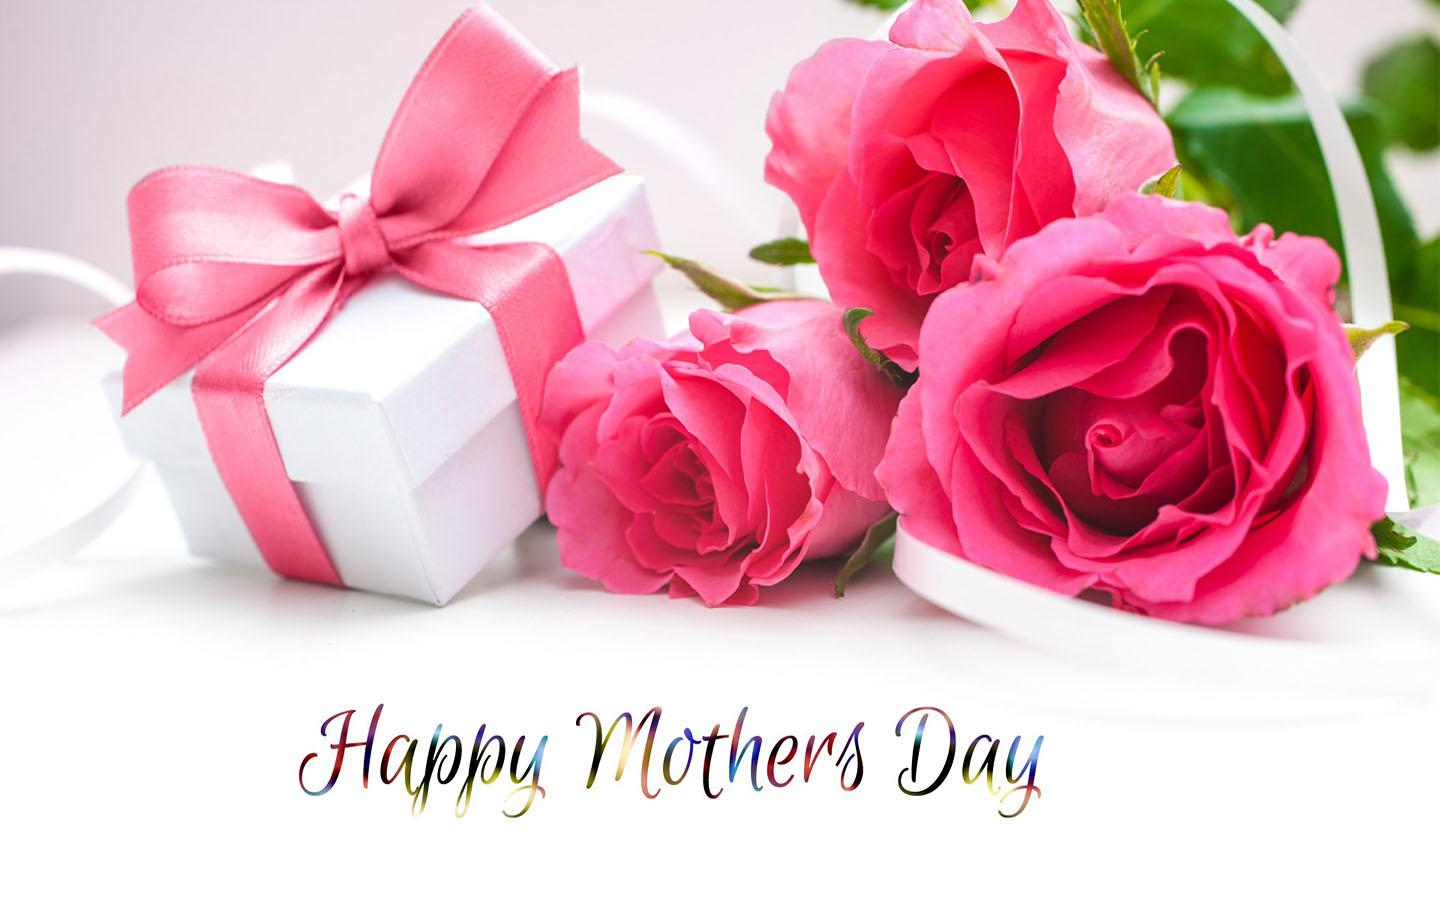 Ecards and Greeting Cards Of Happy Mothers